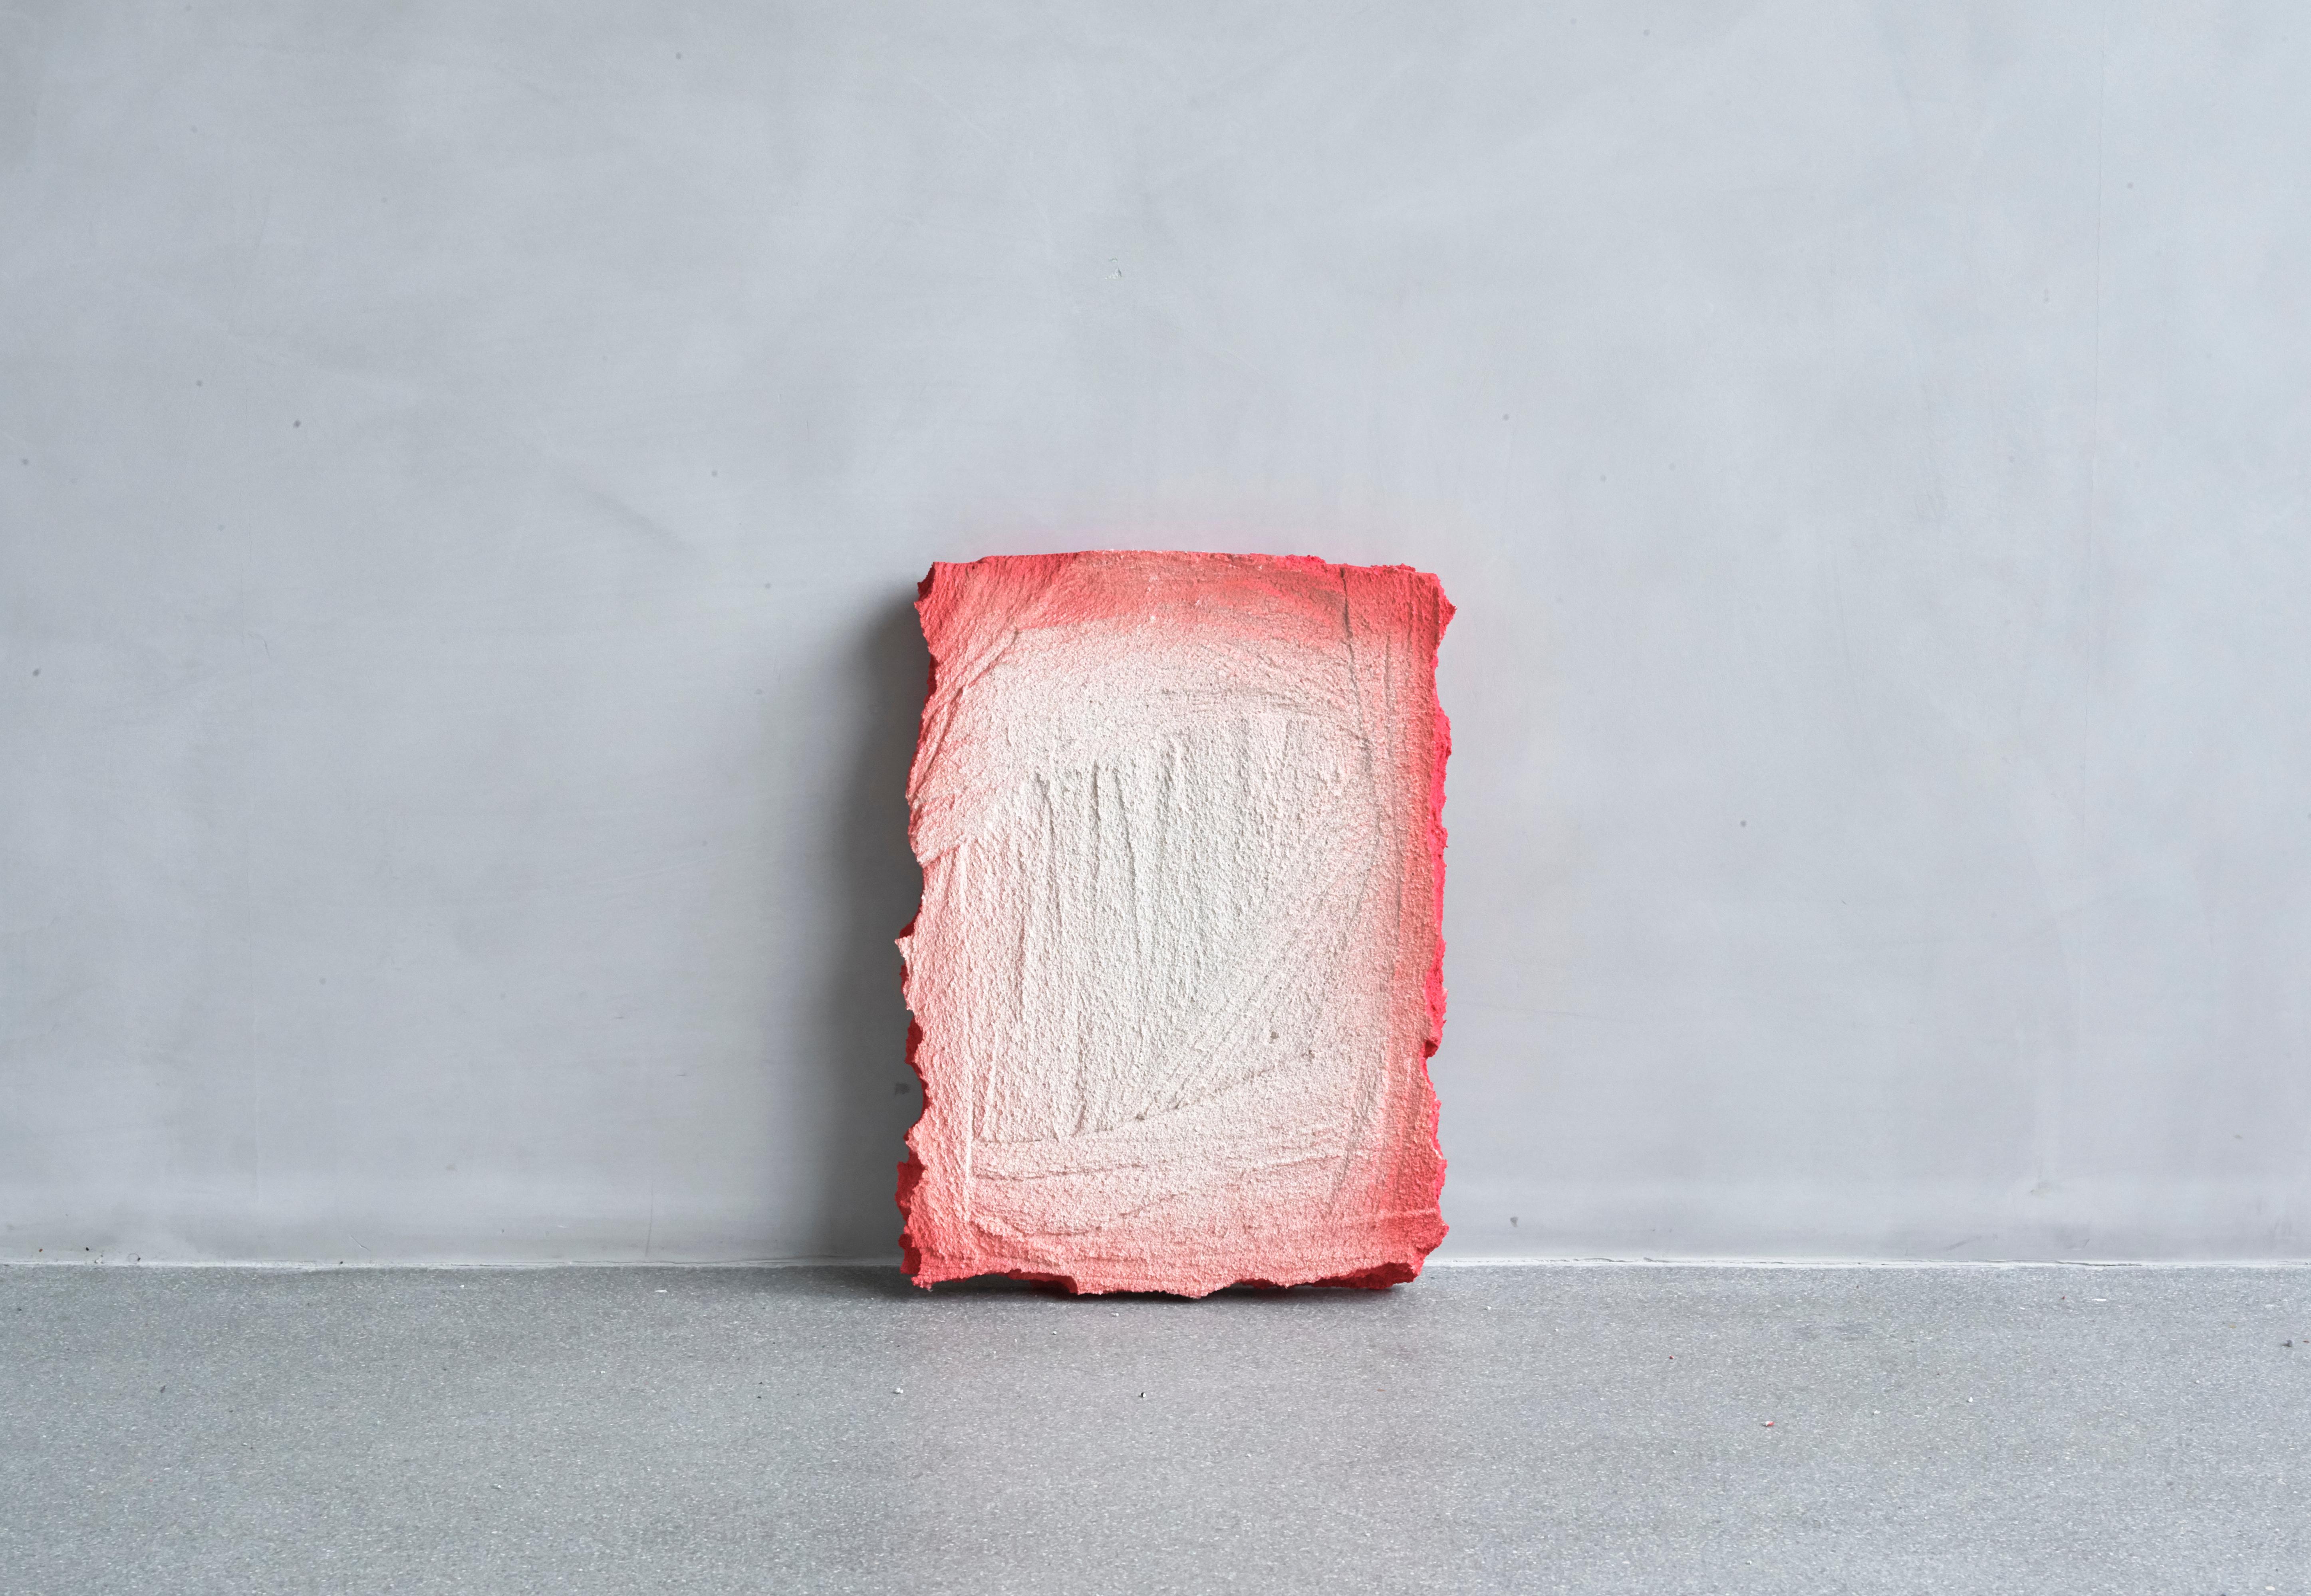 Sunrise wall piece by Andredottir & Bobek
Dimensions: W 320 x H 450 cm
Materials: Reused Foam/mattress and Jesmontite Hardner in Color Red/White Fade

Artificial Nature is a collaboration between the artist and design duo Josephine Andredottir